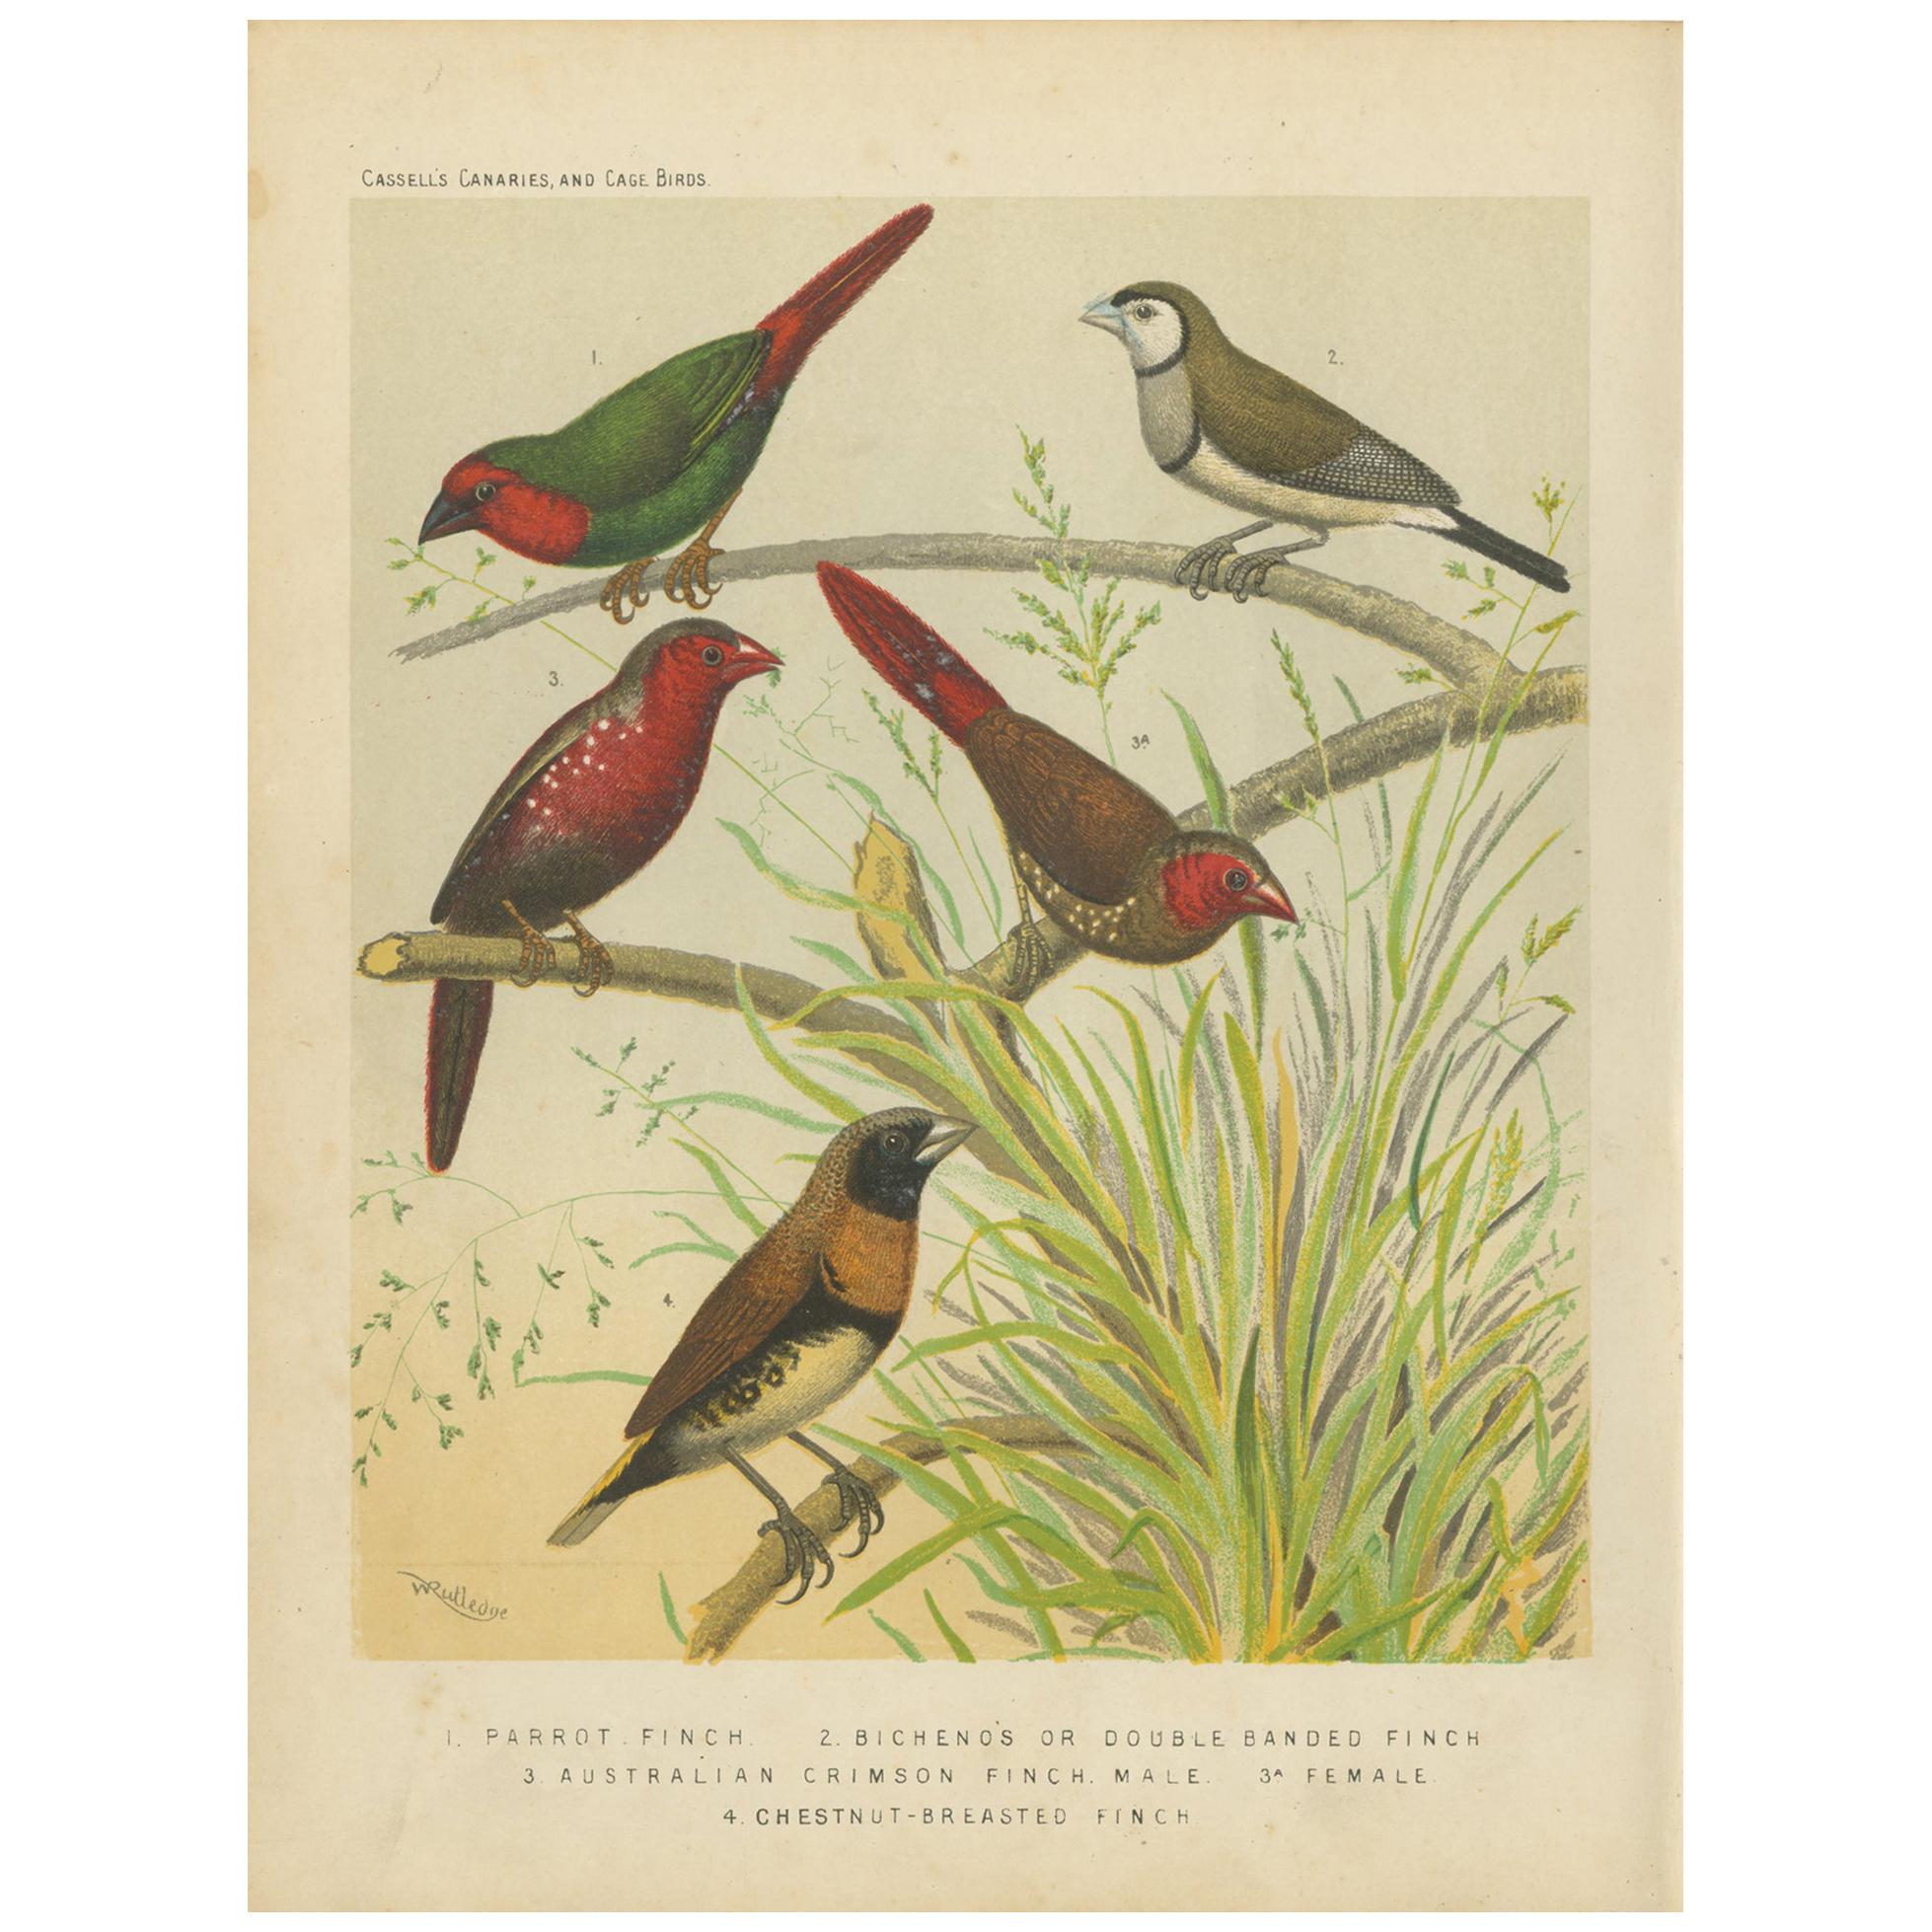 Antique Bird Print of the Parrot Finch, Double Barred Finch and Others